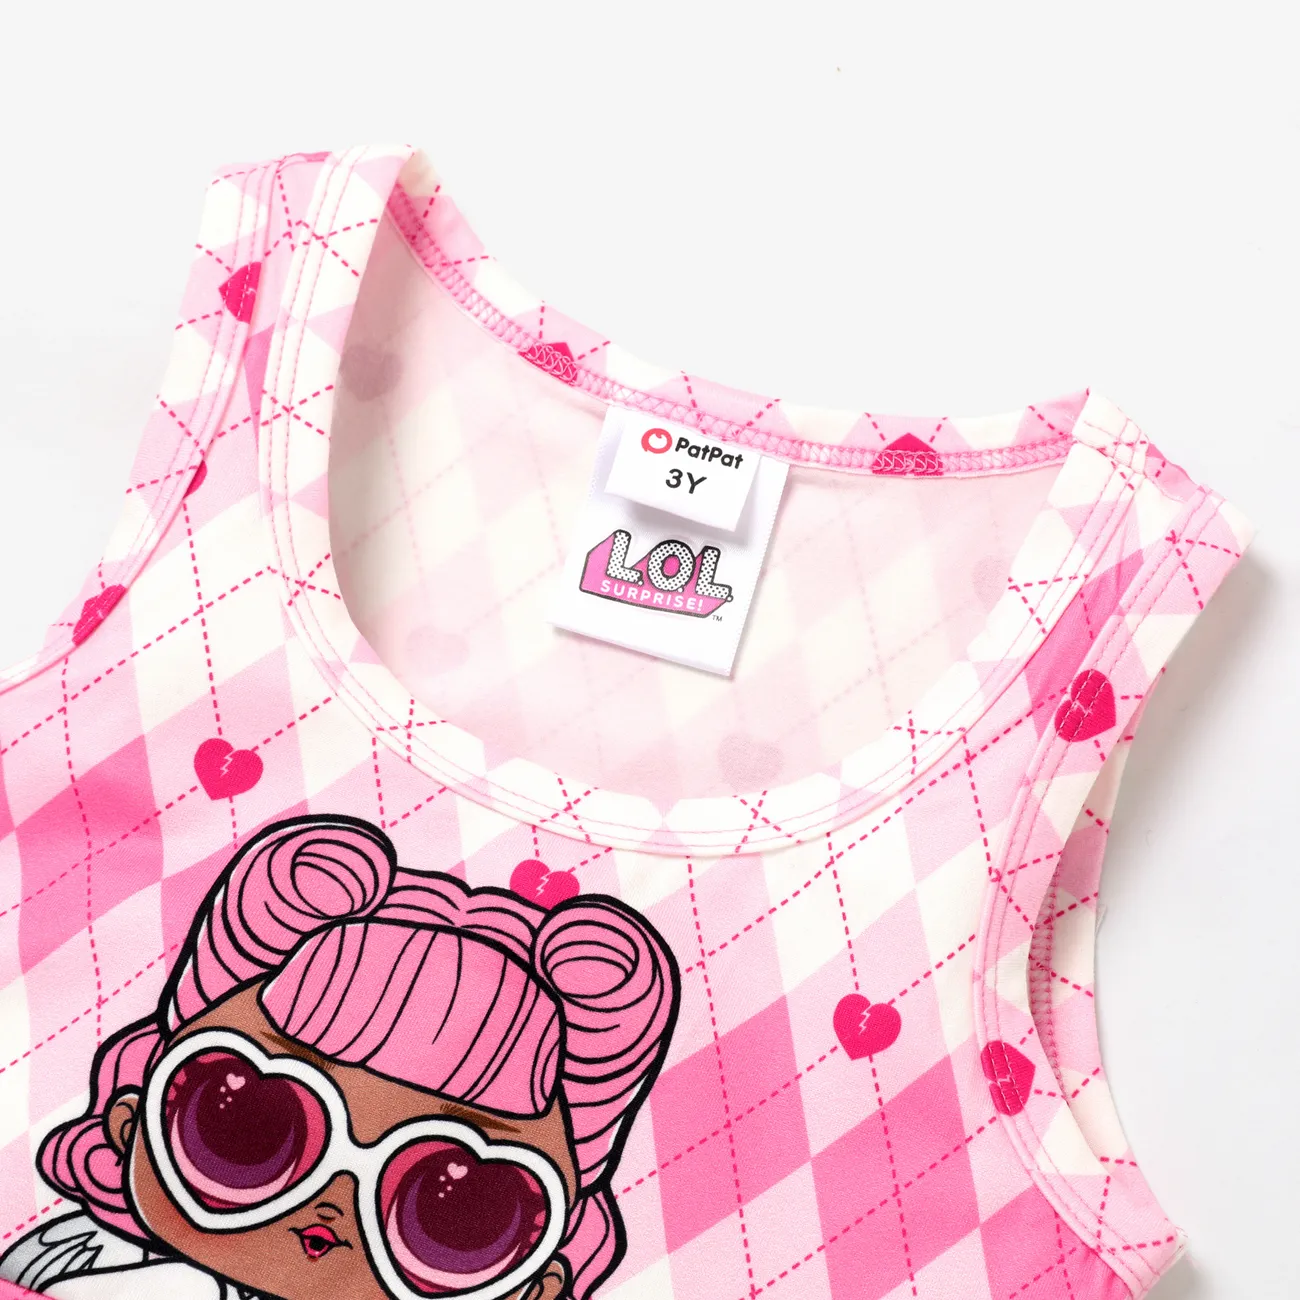 L.O.L. SURPRISE! toddler Girl Graphic Print Cropped Top and Tight Cycling Pants Set Pink big image 1